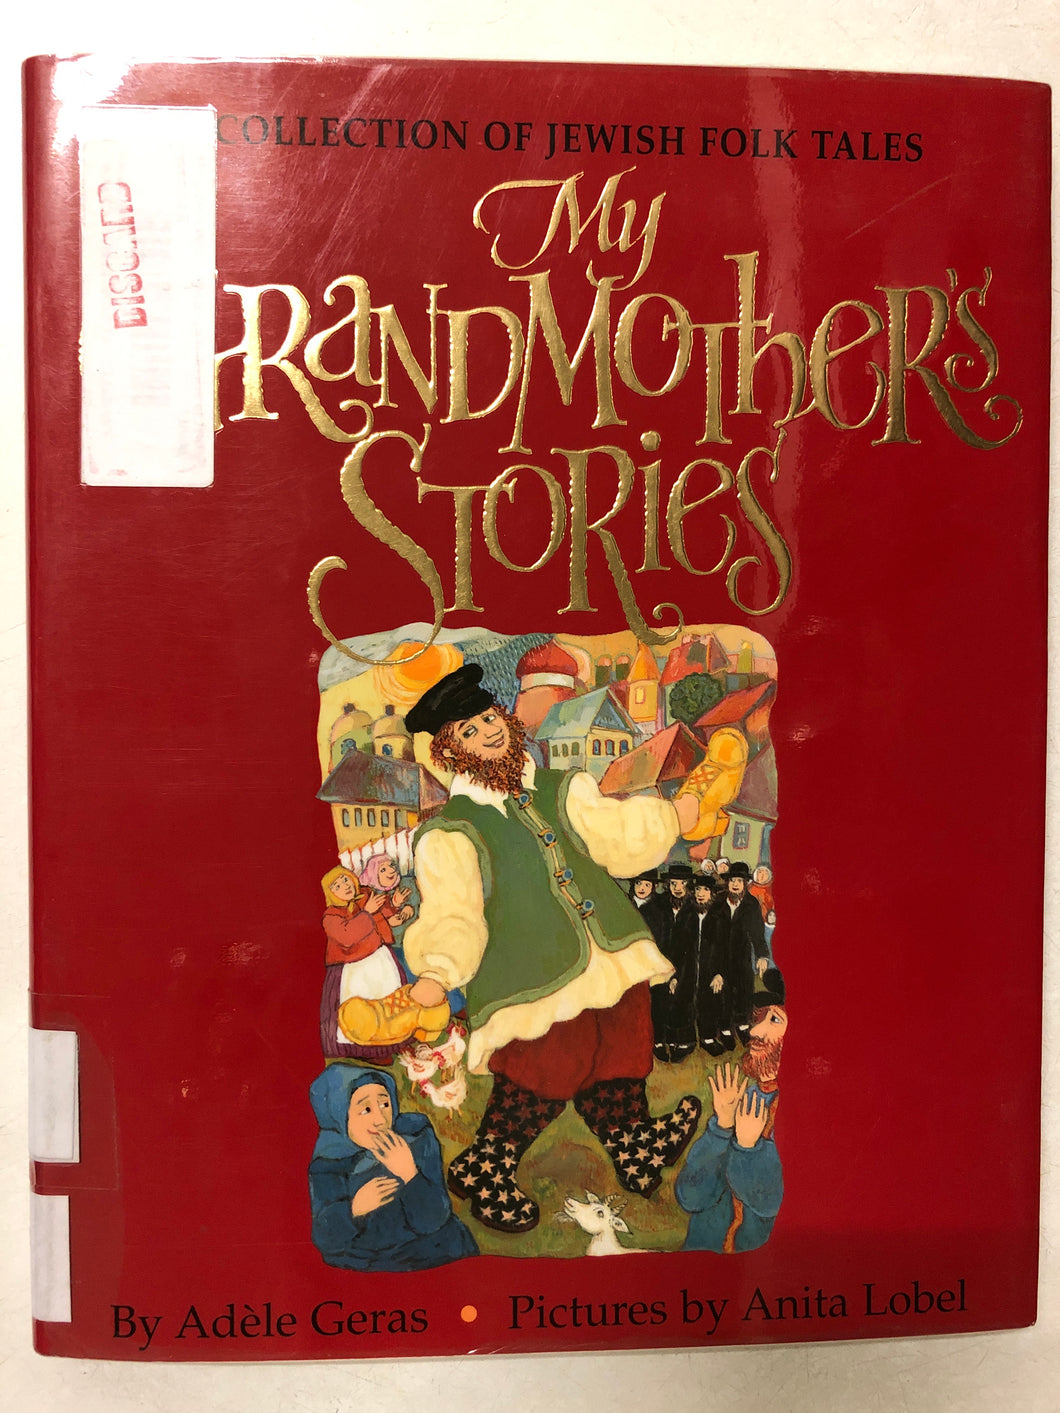 My Grandmother’s Stories A Collection of Jewish Folk Tales - Slick Cat Books 